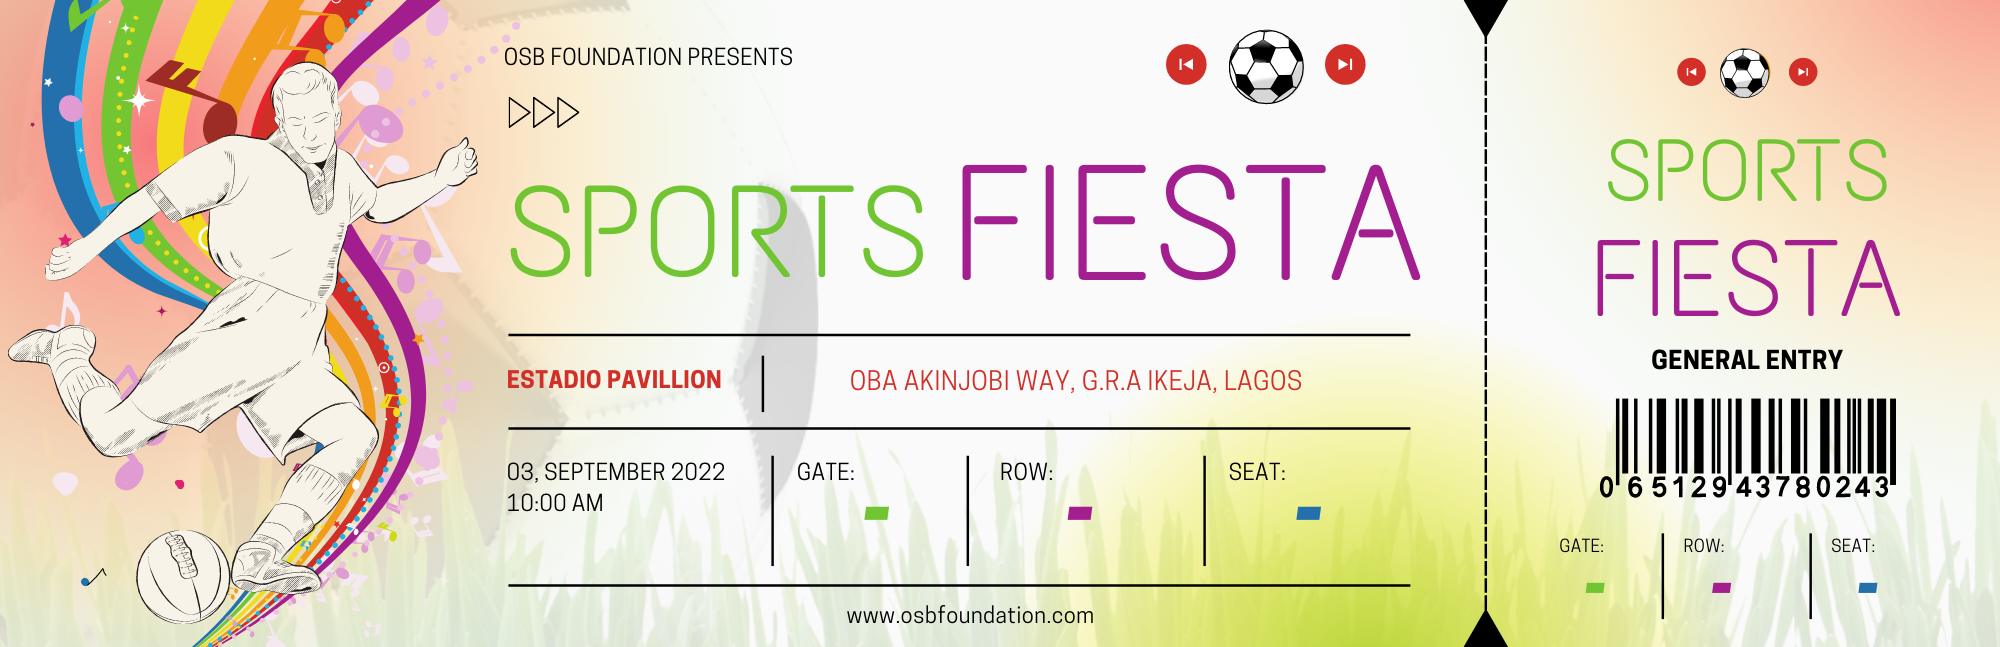 OSB SPORTS FIESTA FUNDRAISER Post free event in Nigeria using tickethub.ng, buy and sell tickets to event